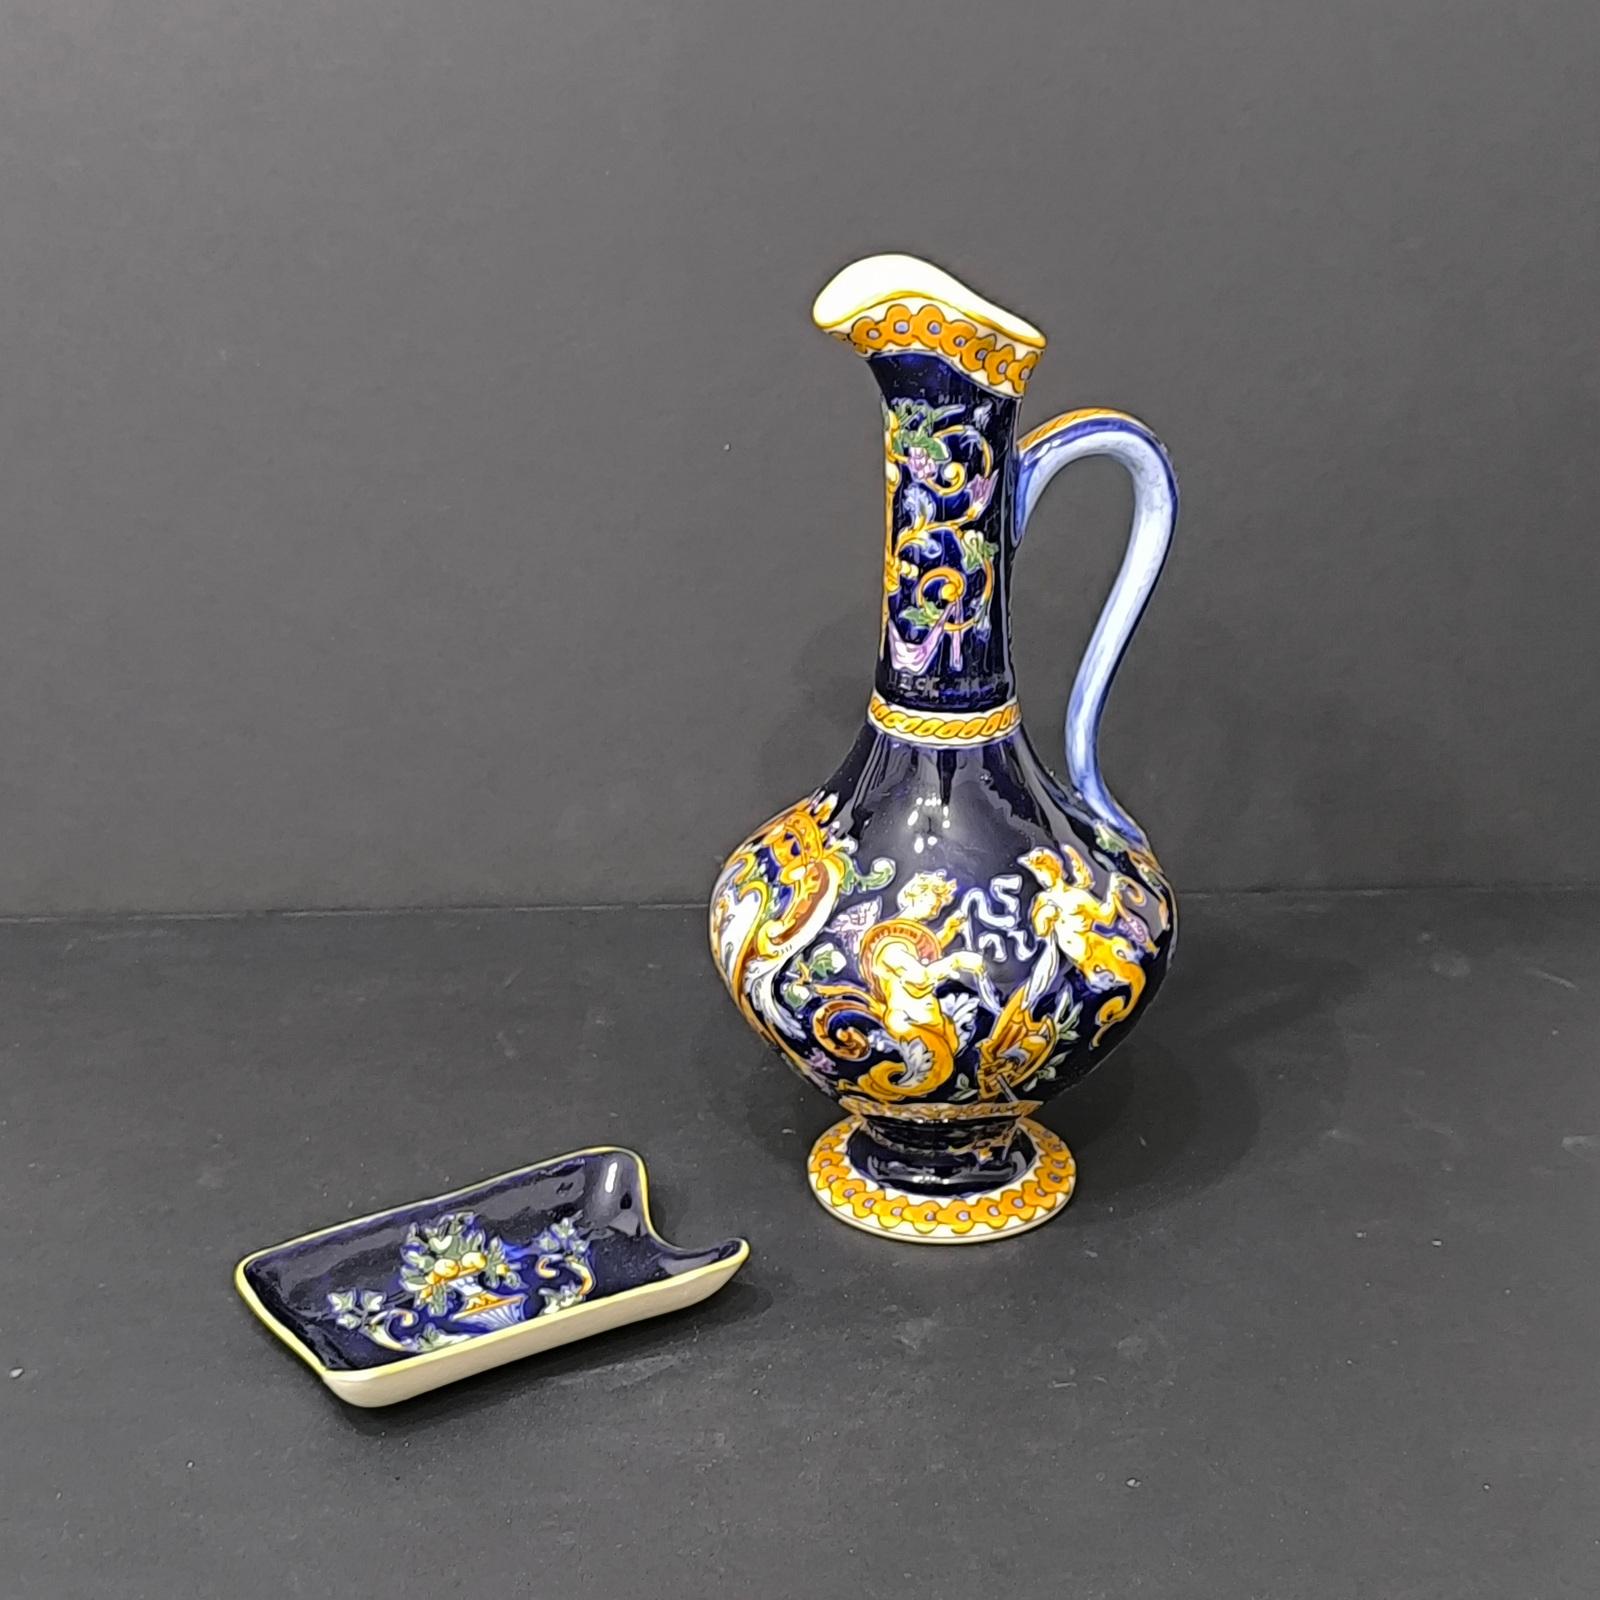 A beautiful set of ceramic pieces by Gien France, 1970s-1980s.
It comprises a jug and a small tray.
The jug is hand-painted with a Renaissance design against a royal blue glazed background, skillfully crafted with attention to detail. 
The small